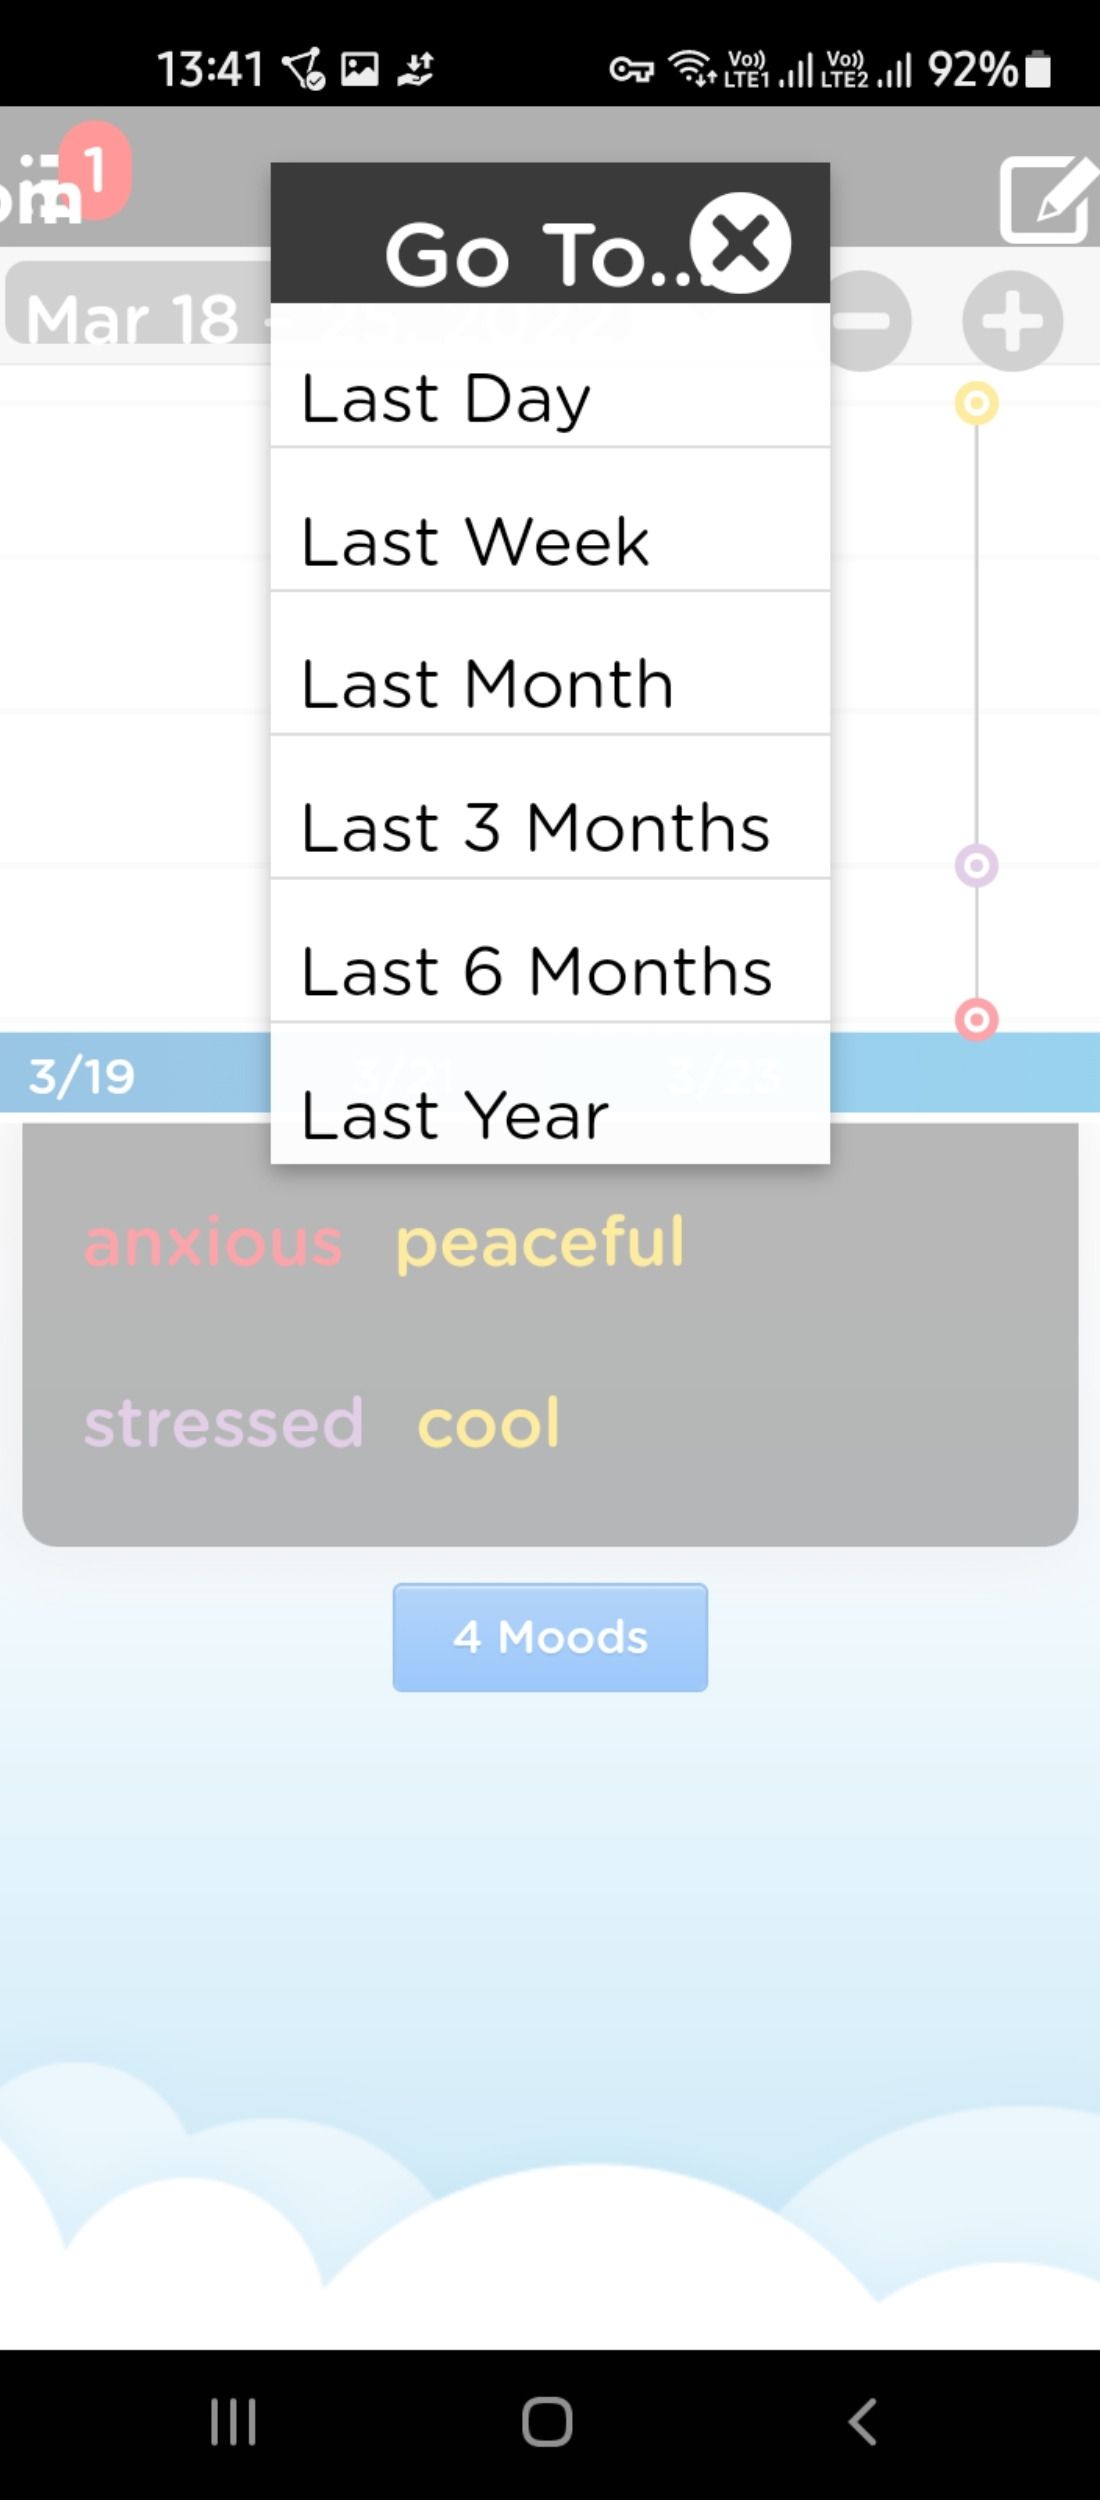 Time periods to journal and record entries in Moodtrack